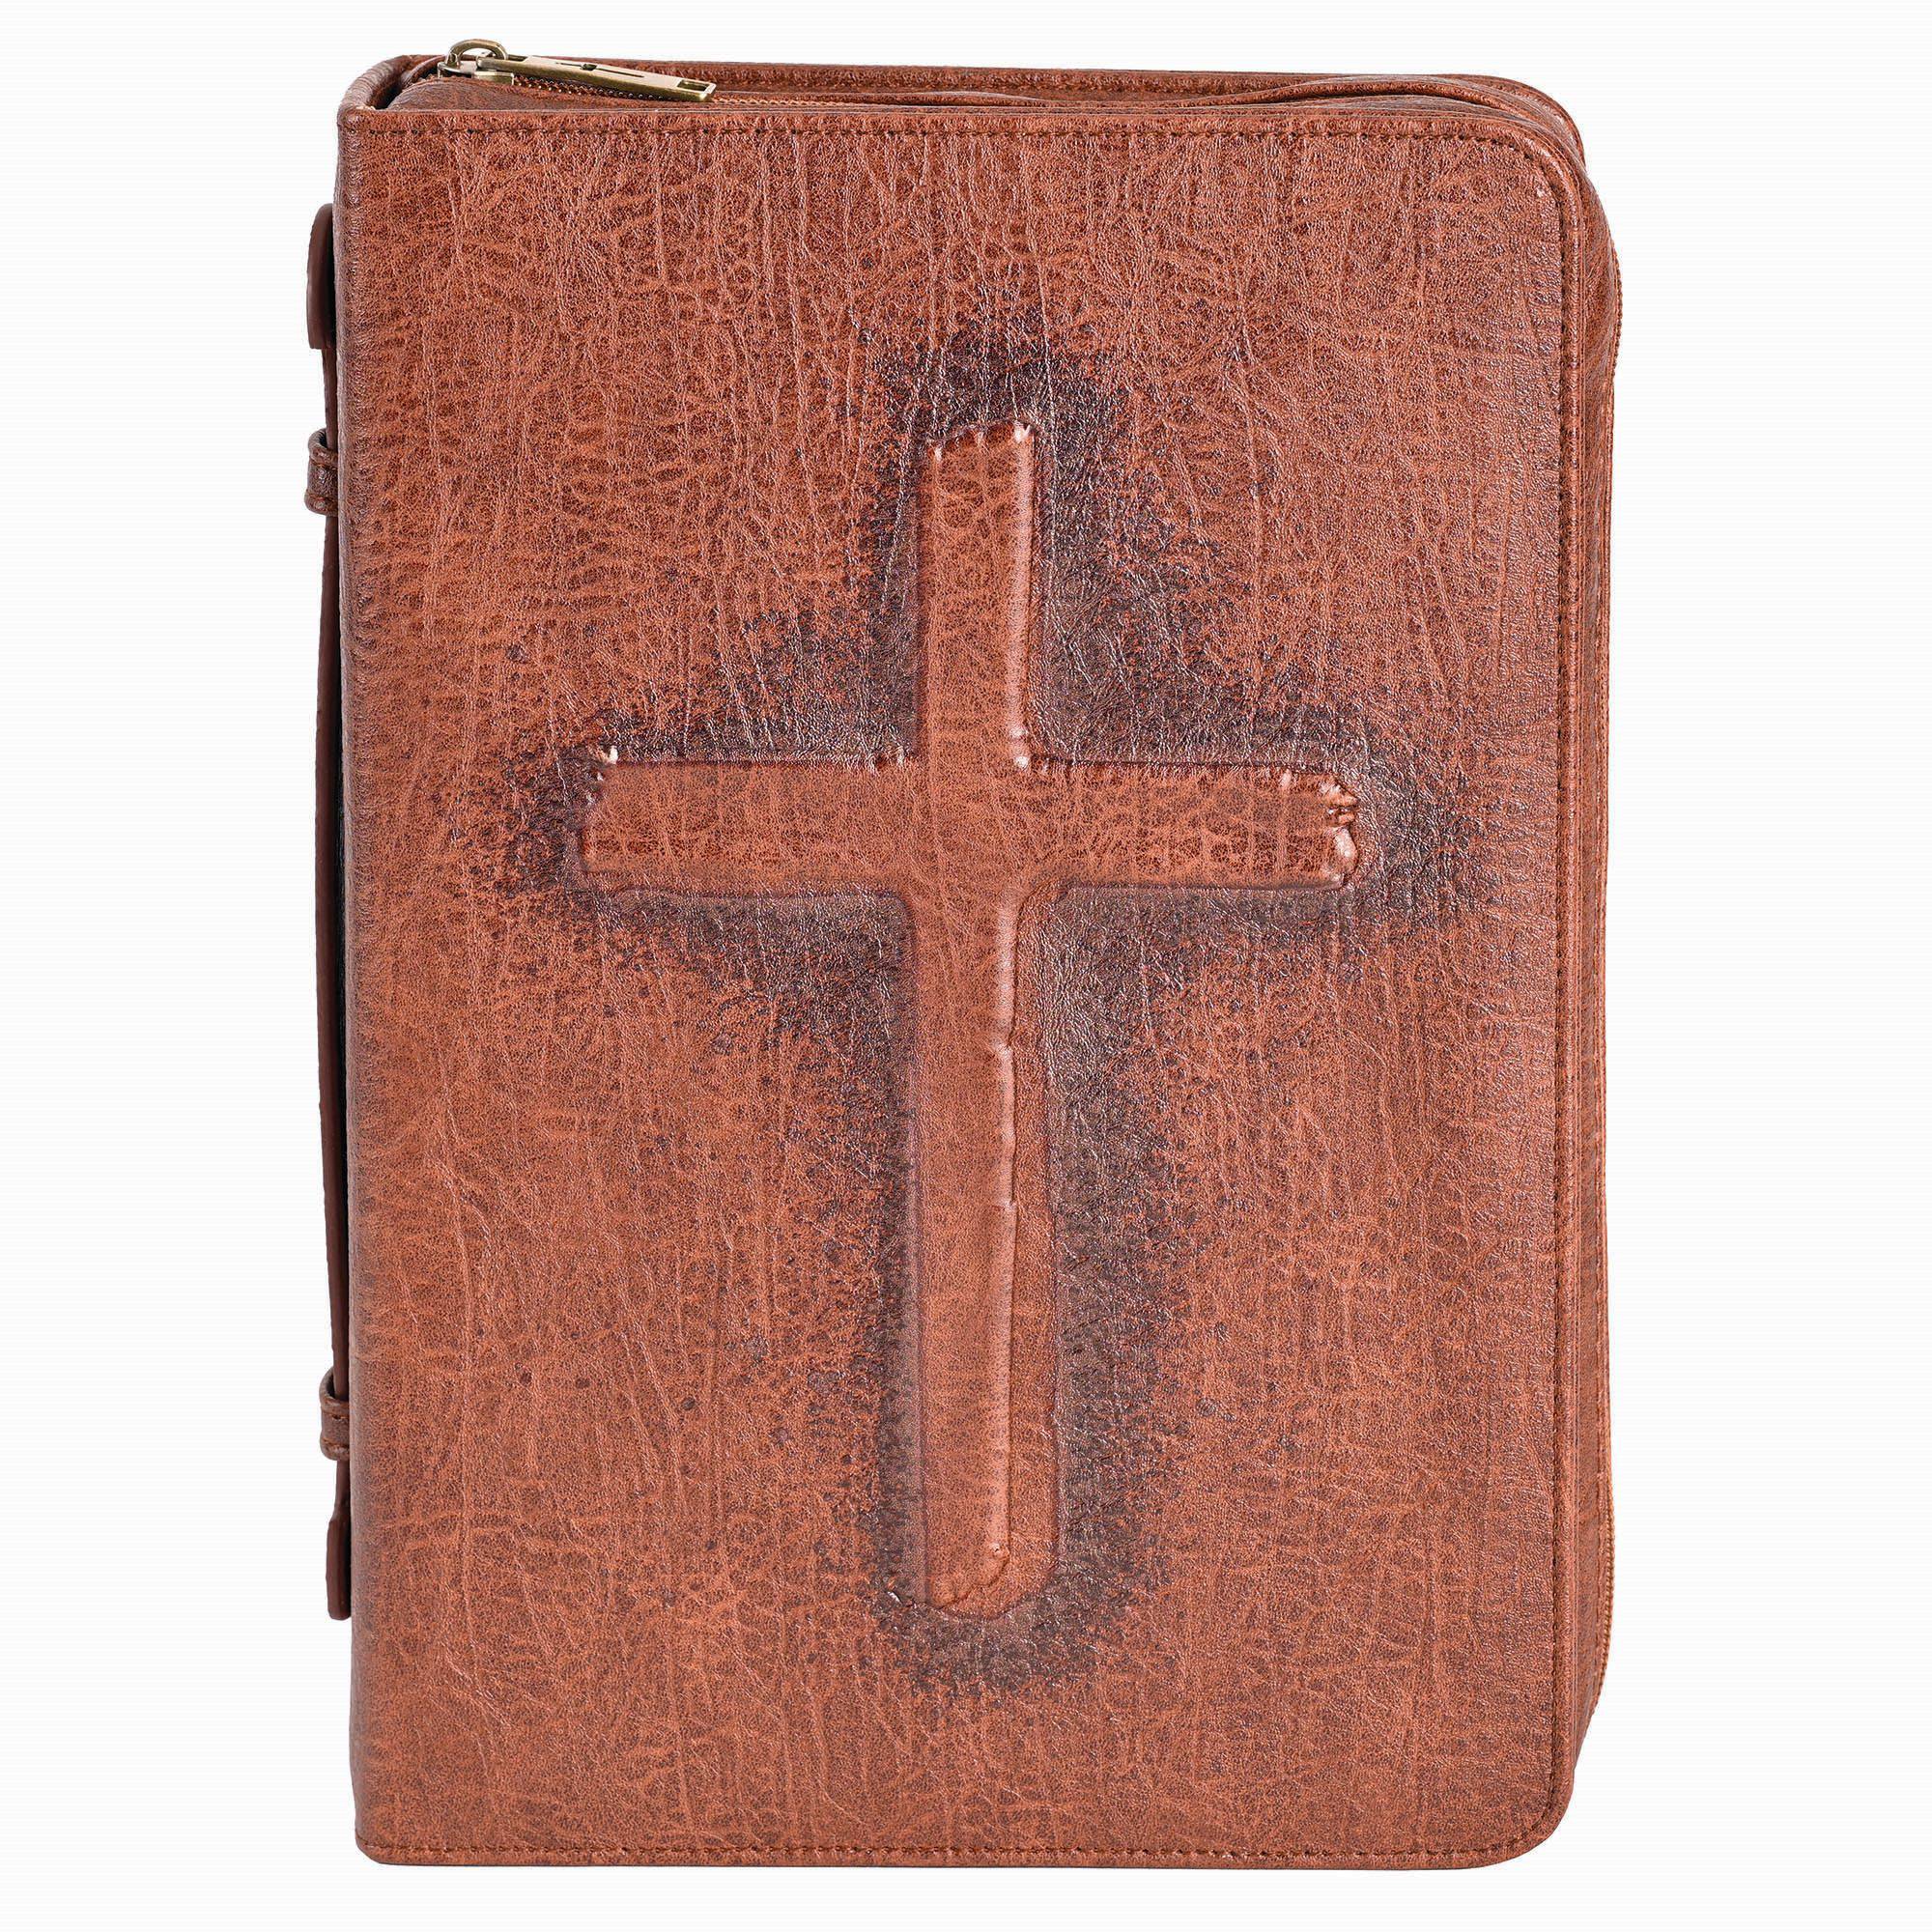 White Dove Designs 255130 Bible Cover - Faith Collection Cross & Heart,  Brown - Extra Large